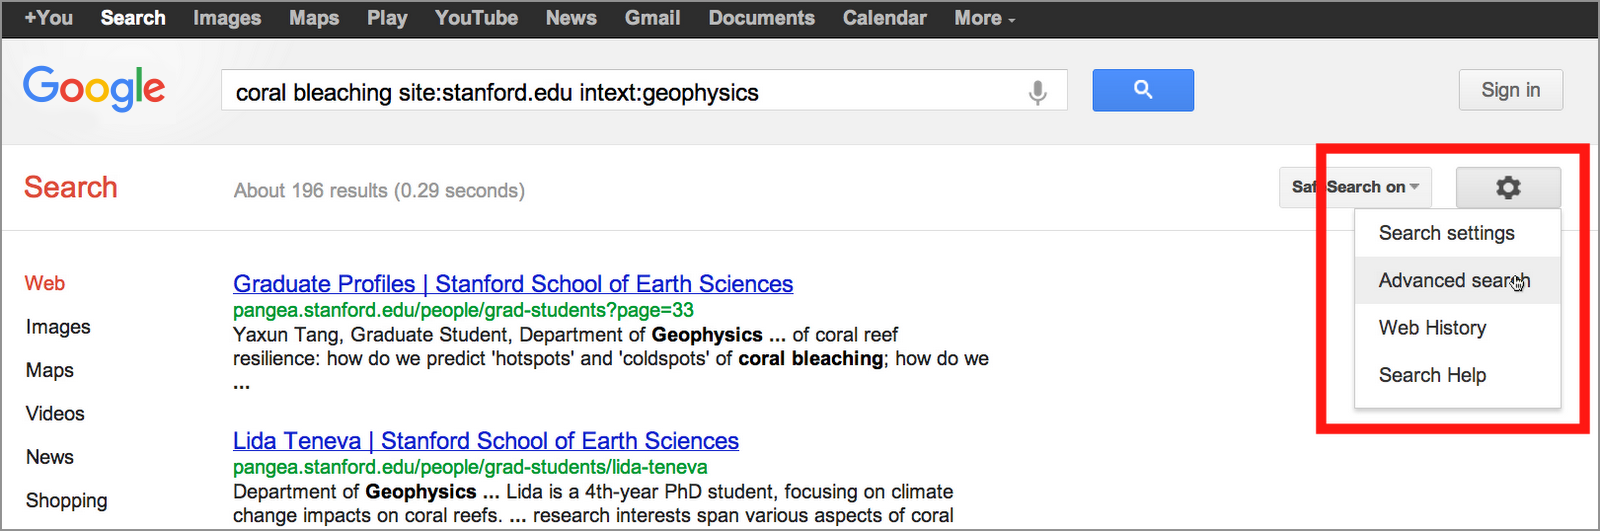 +You Search Images Maps Play YouTube News Gmail Documents Calendar More -

 

    

Go gle coral bleaching site:stanford.edu intext:geophysics ’ [a | Sign in
Search
Search settings
Web Graduate Profiles | Stanford School of Earth Sciences Advanced searfh
pangea.stanford.edu/people/grad-students?page=33
Images Yaxun Tang, Graduate Student, Department of Geophysics ... of coral reef Web History
resilience: how do we predict ‘hotspots’ and ‘coldspots’ of coral bleaching; how do we
Maps » Search Help
Videos
Lida Teneva | Stanford School of Earth Sciences

pangea. stanford. edu/people/grad-students/lida-teneva
Shopping Department of Geophysics ... Lida is a 4th-year PhD student, focusing on climate
change impacts on coral reefs. ... research interests span various aspects of coral